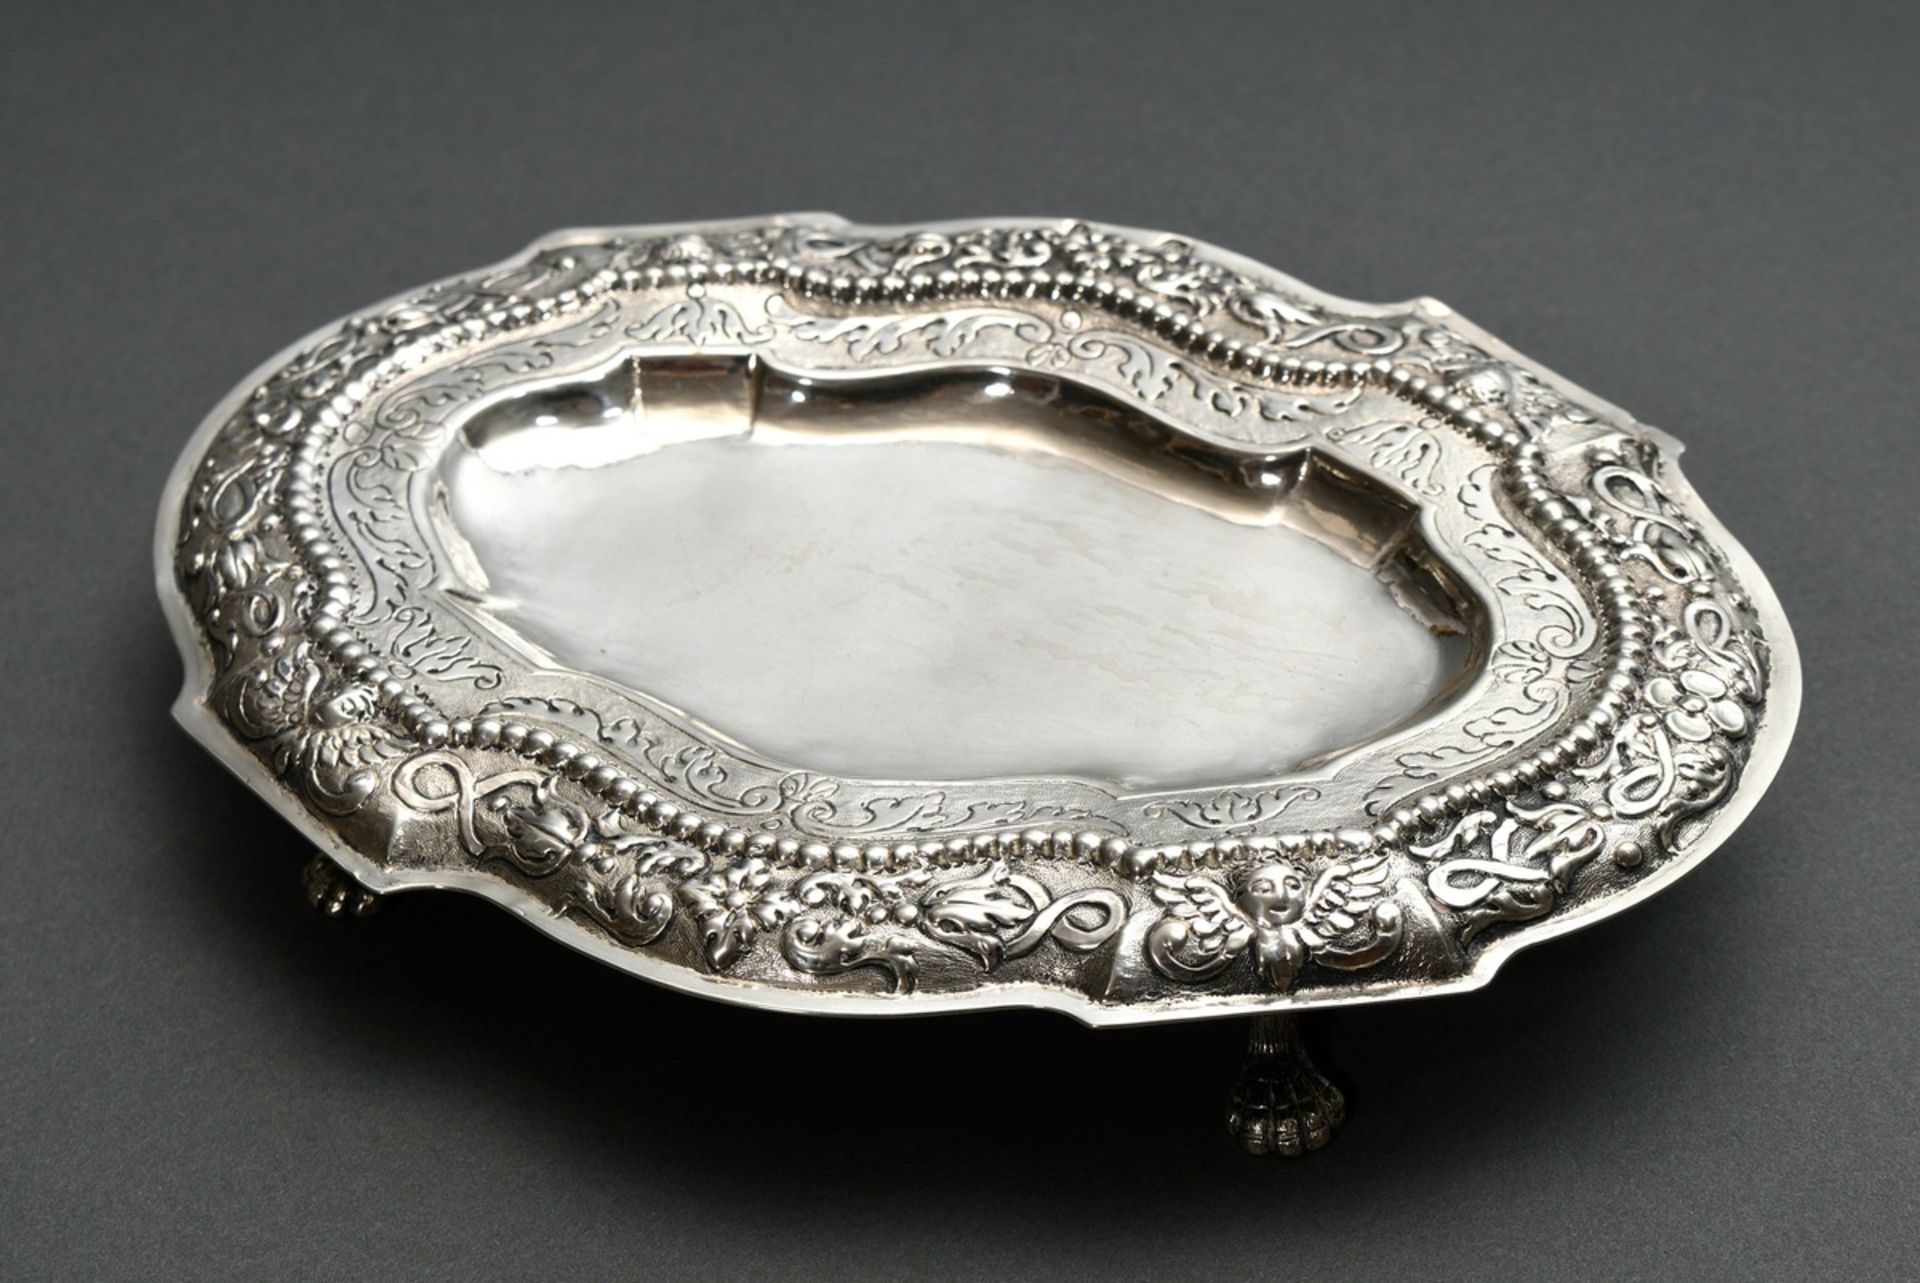 Oval Régence presentoir with richly decorated rim on paw feet, c. 1720, MM: ‘PW’, silver, 159g, 13x